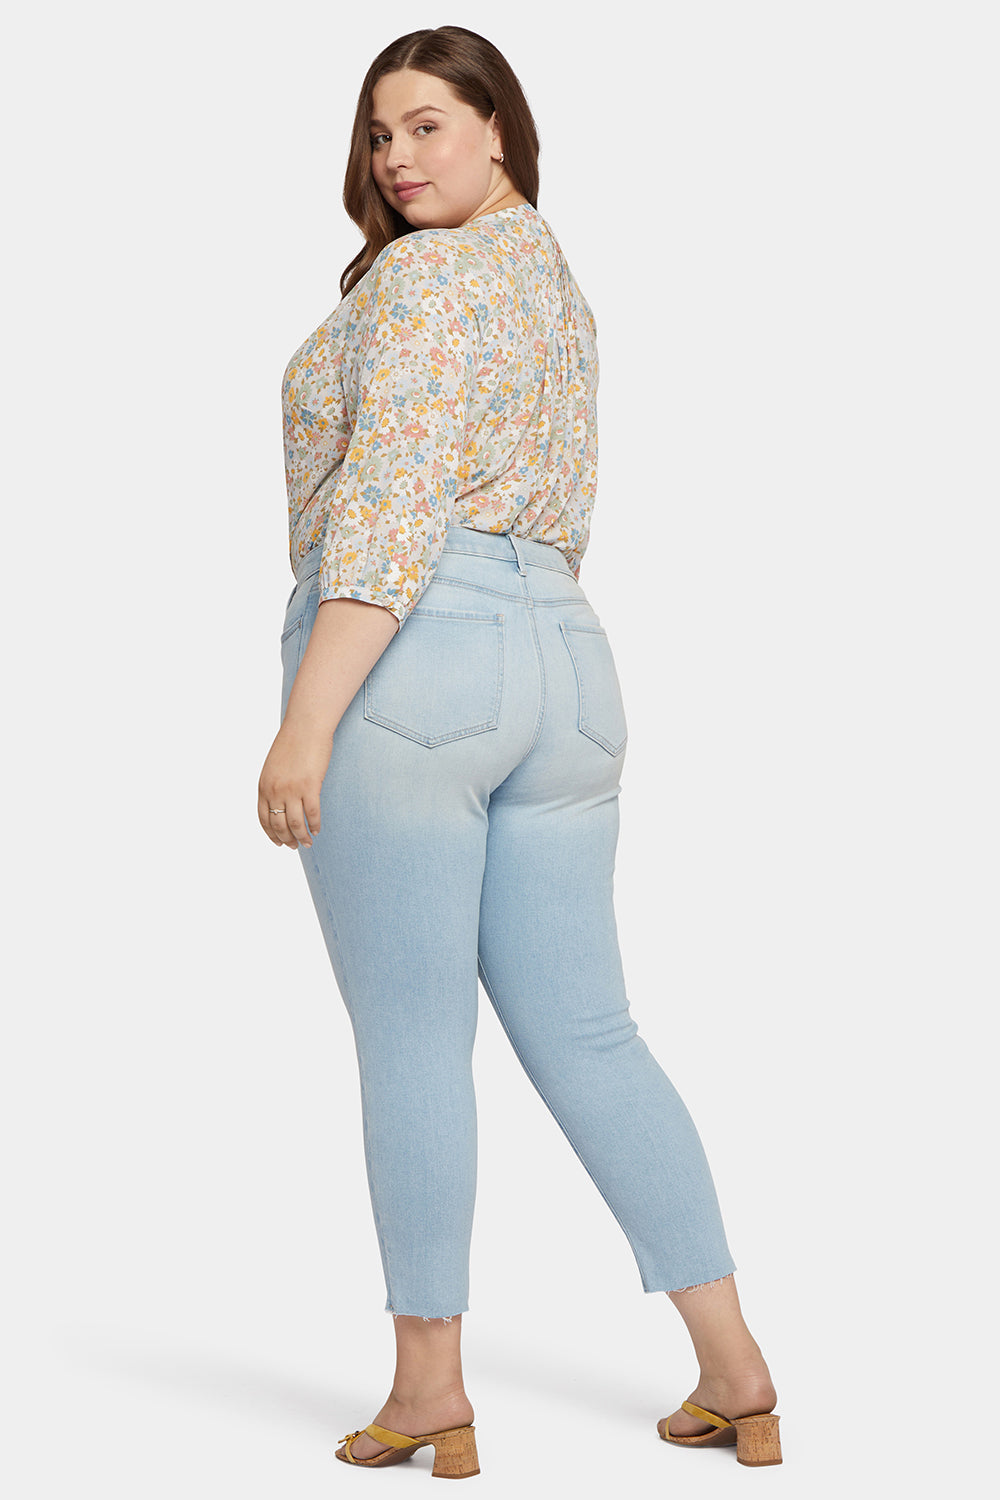 NYDJ Alina Skinny Ankle Jeans In Plus Size With Raw Hems - Dunes